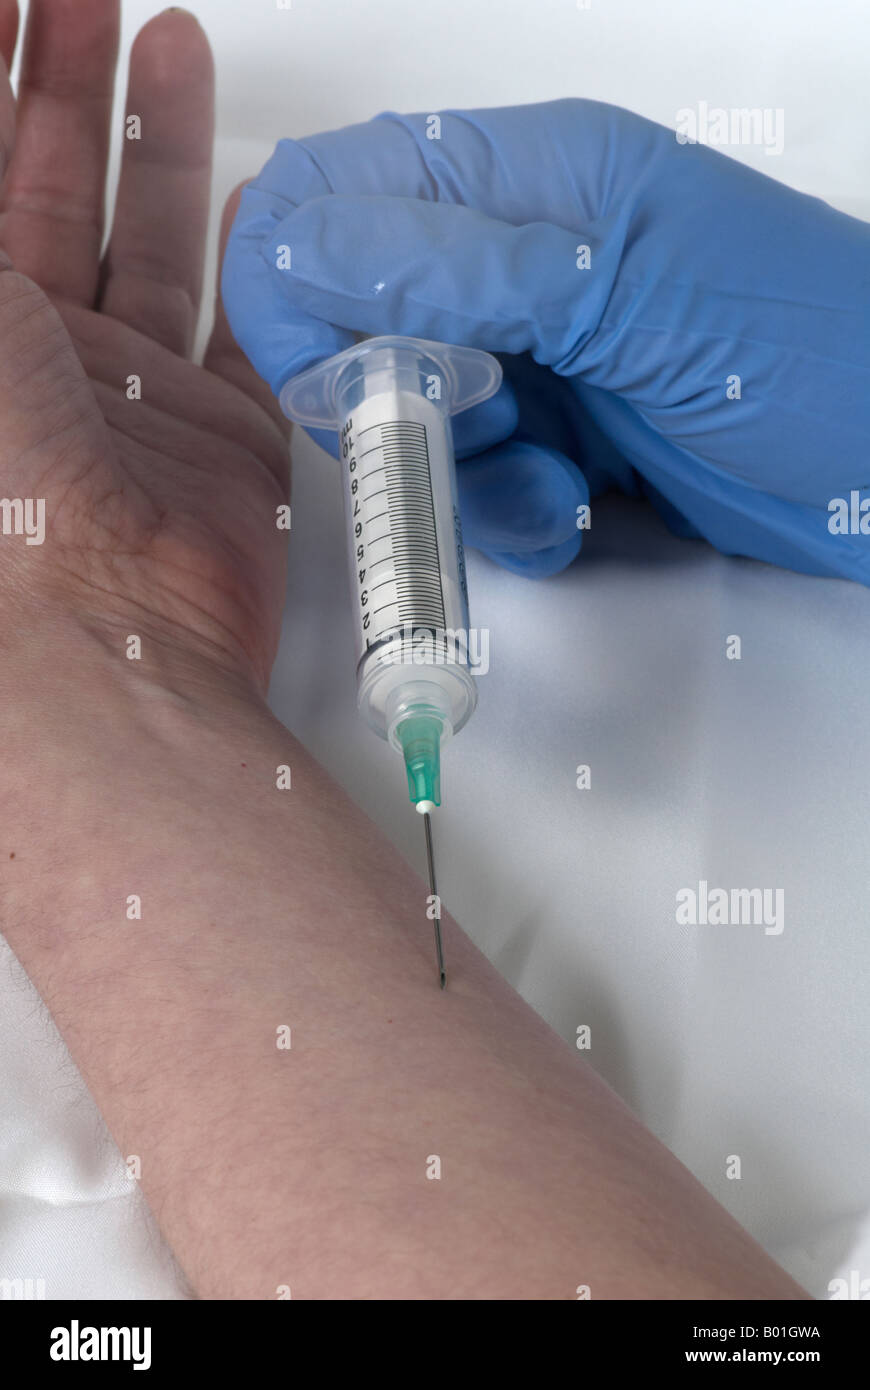 simulating the use of a needle in the arm by the same person with surgical gloves Stock Photo